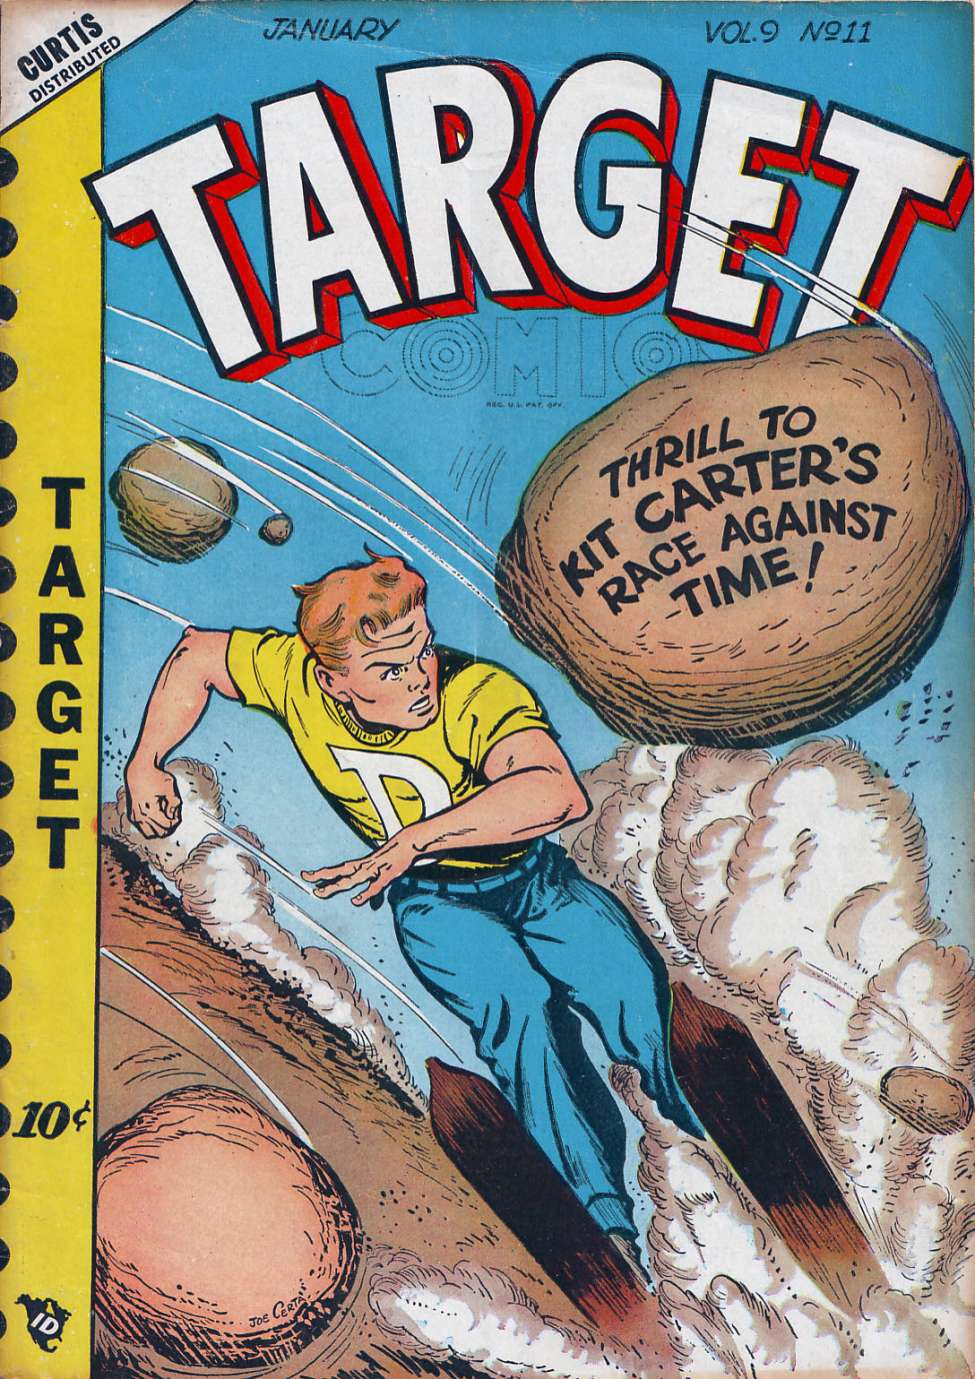 Book Cover For Target Comics v9 11